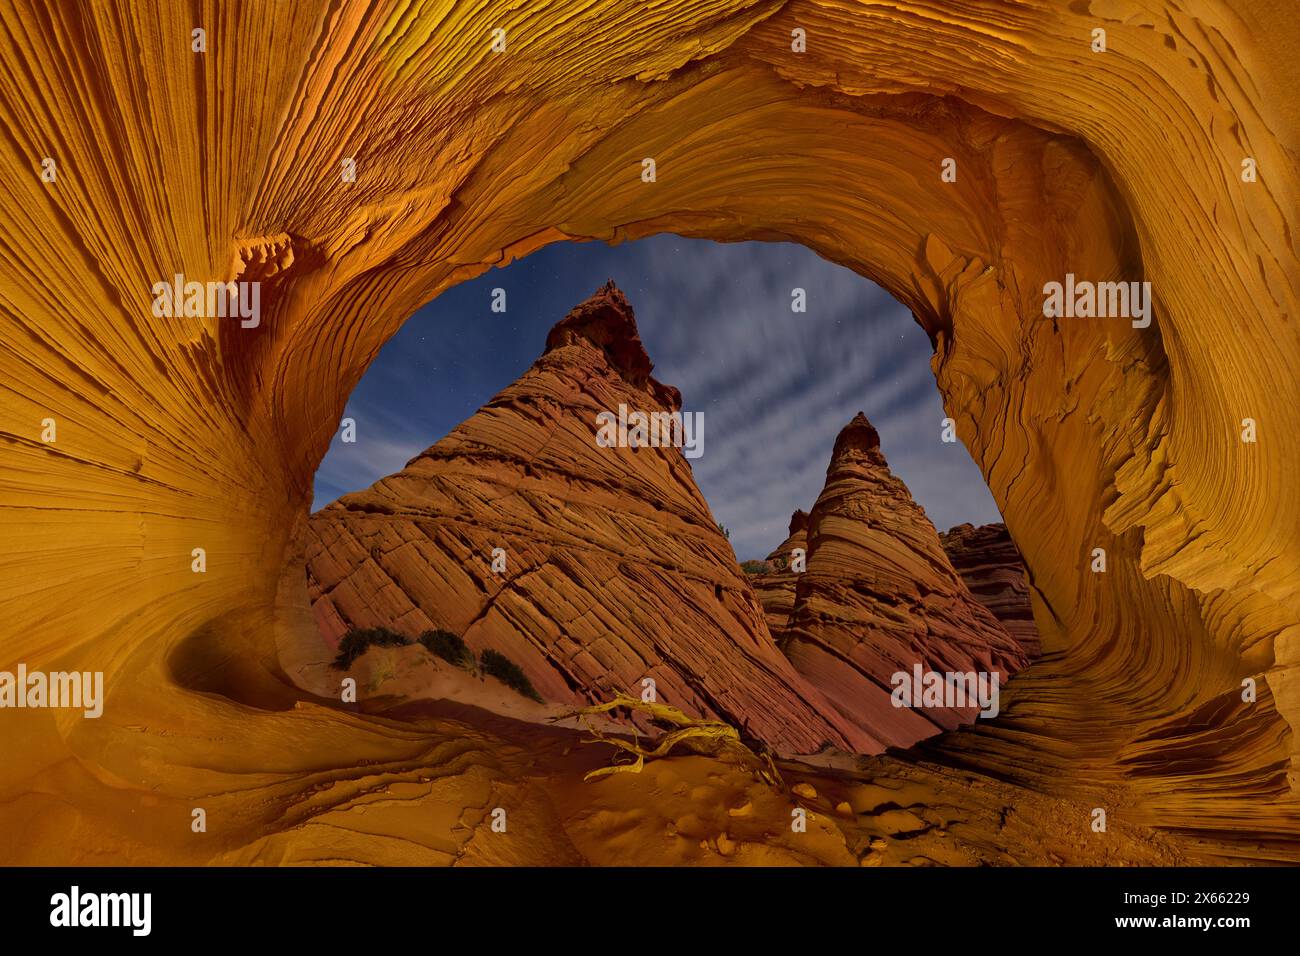 Hoodoos illuminated at night, seen from within an alcove in Ariz Stock Photo